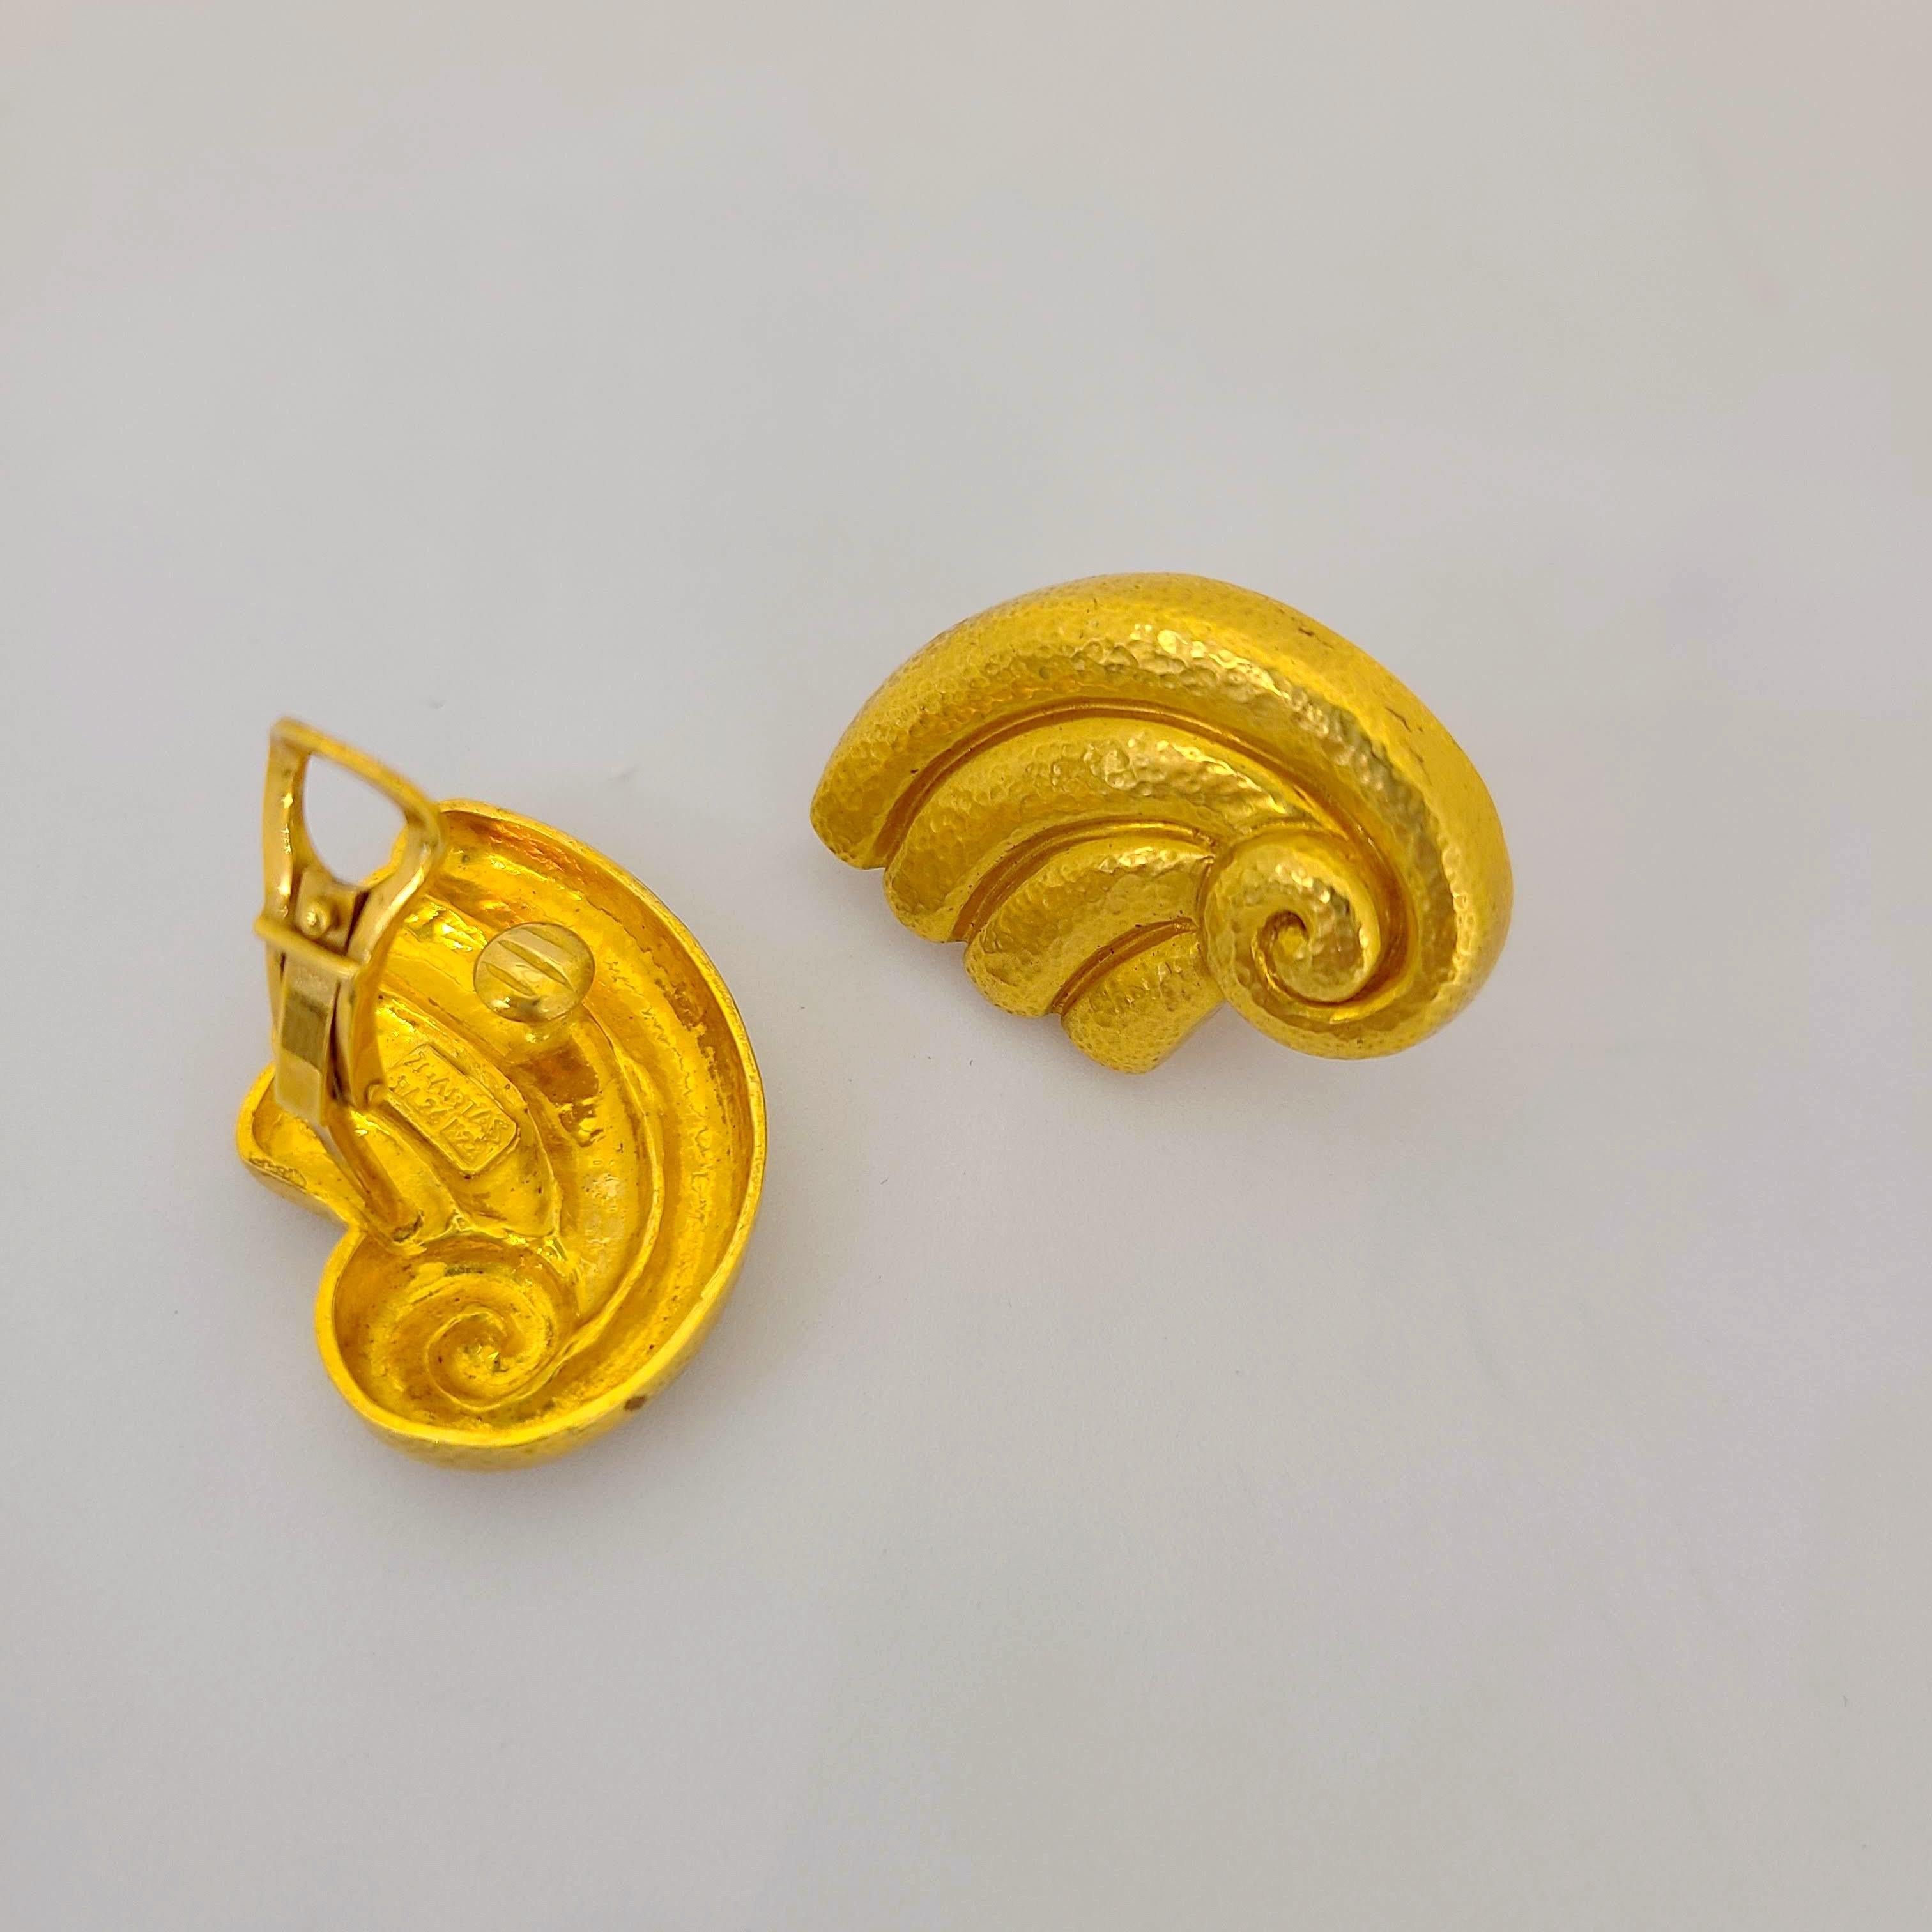 This earrings were designed by Zolotas of Athens , Greece. Founded in 1895 the company merges Greek heritage with modern style to create these timeless pieces. Coveted by Royals and Actresses.
The Greek Ionic column was the inspiration for these